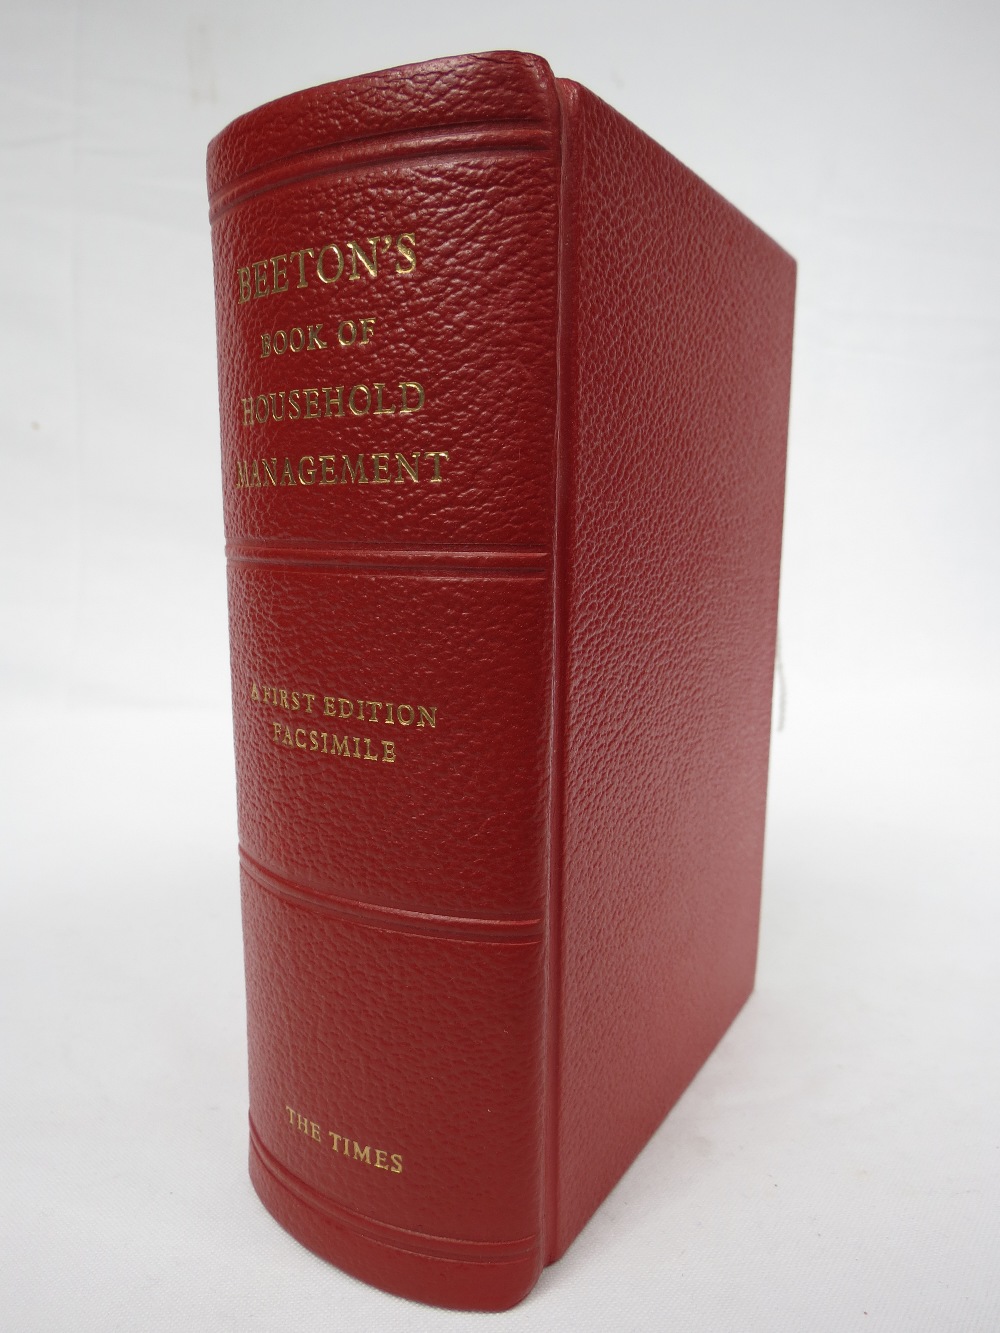 Isabella Beeton. Mrs Beeton`s Book of Household Management. A very smart first edition facsimile